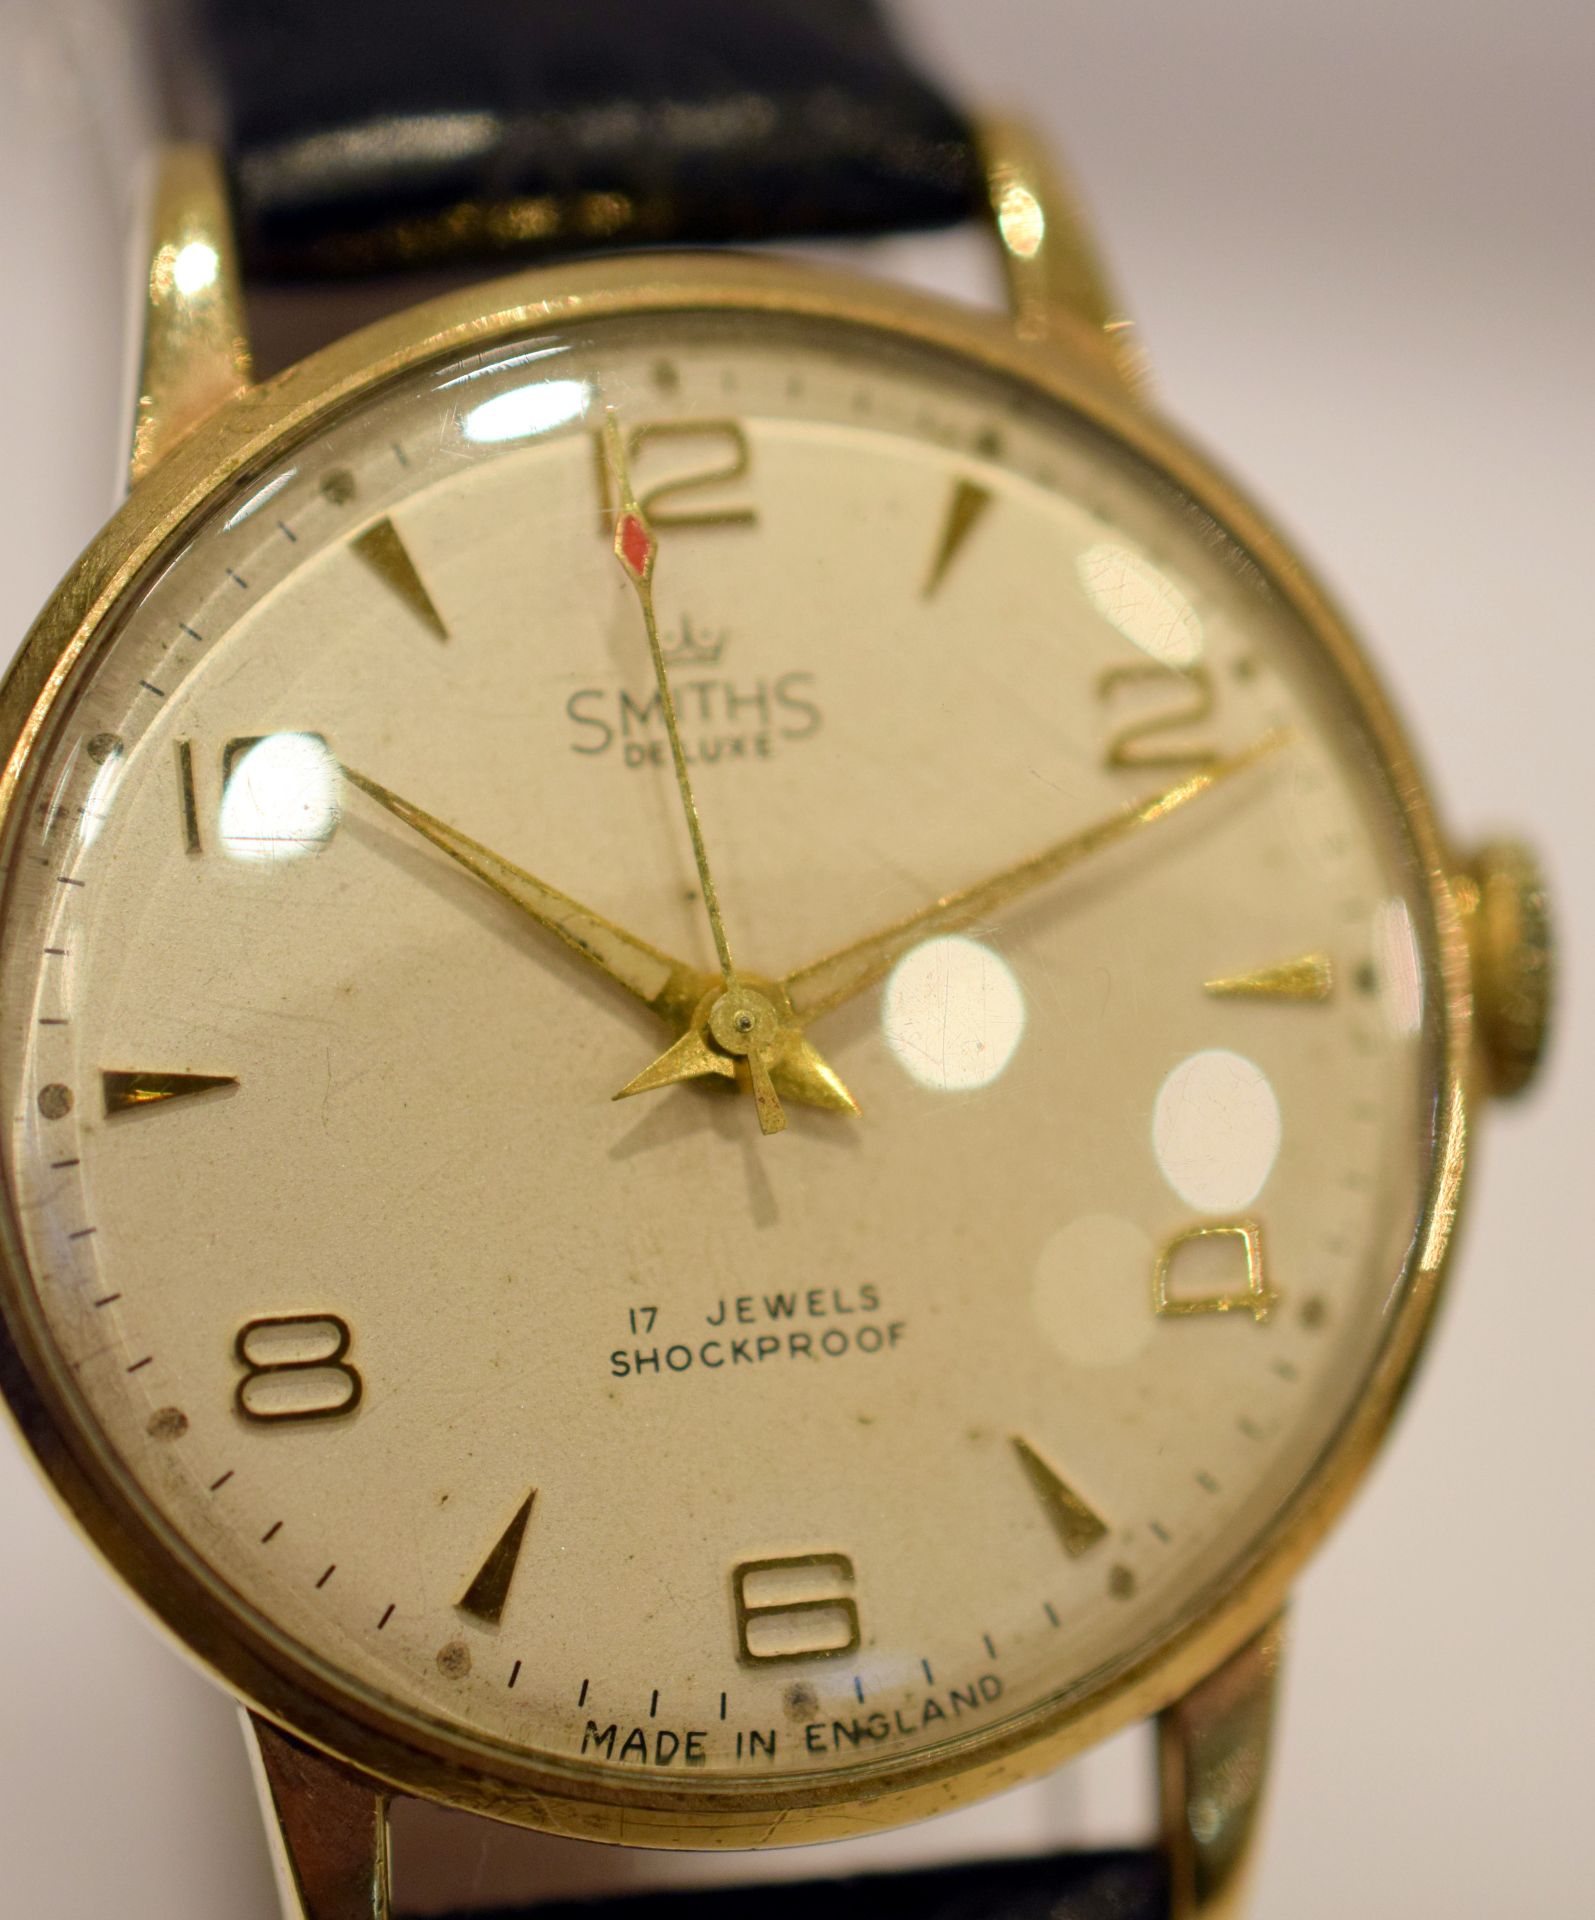 9ct Gold Smiths DeLuxe Wristwatch - Image 2 of 4